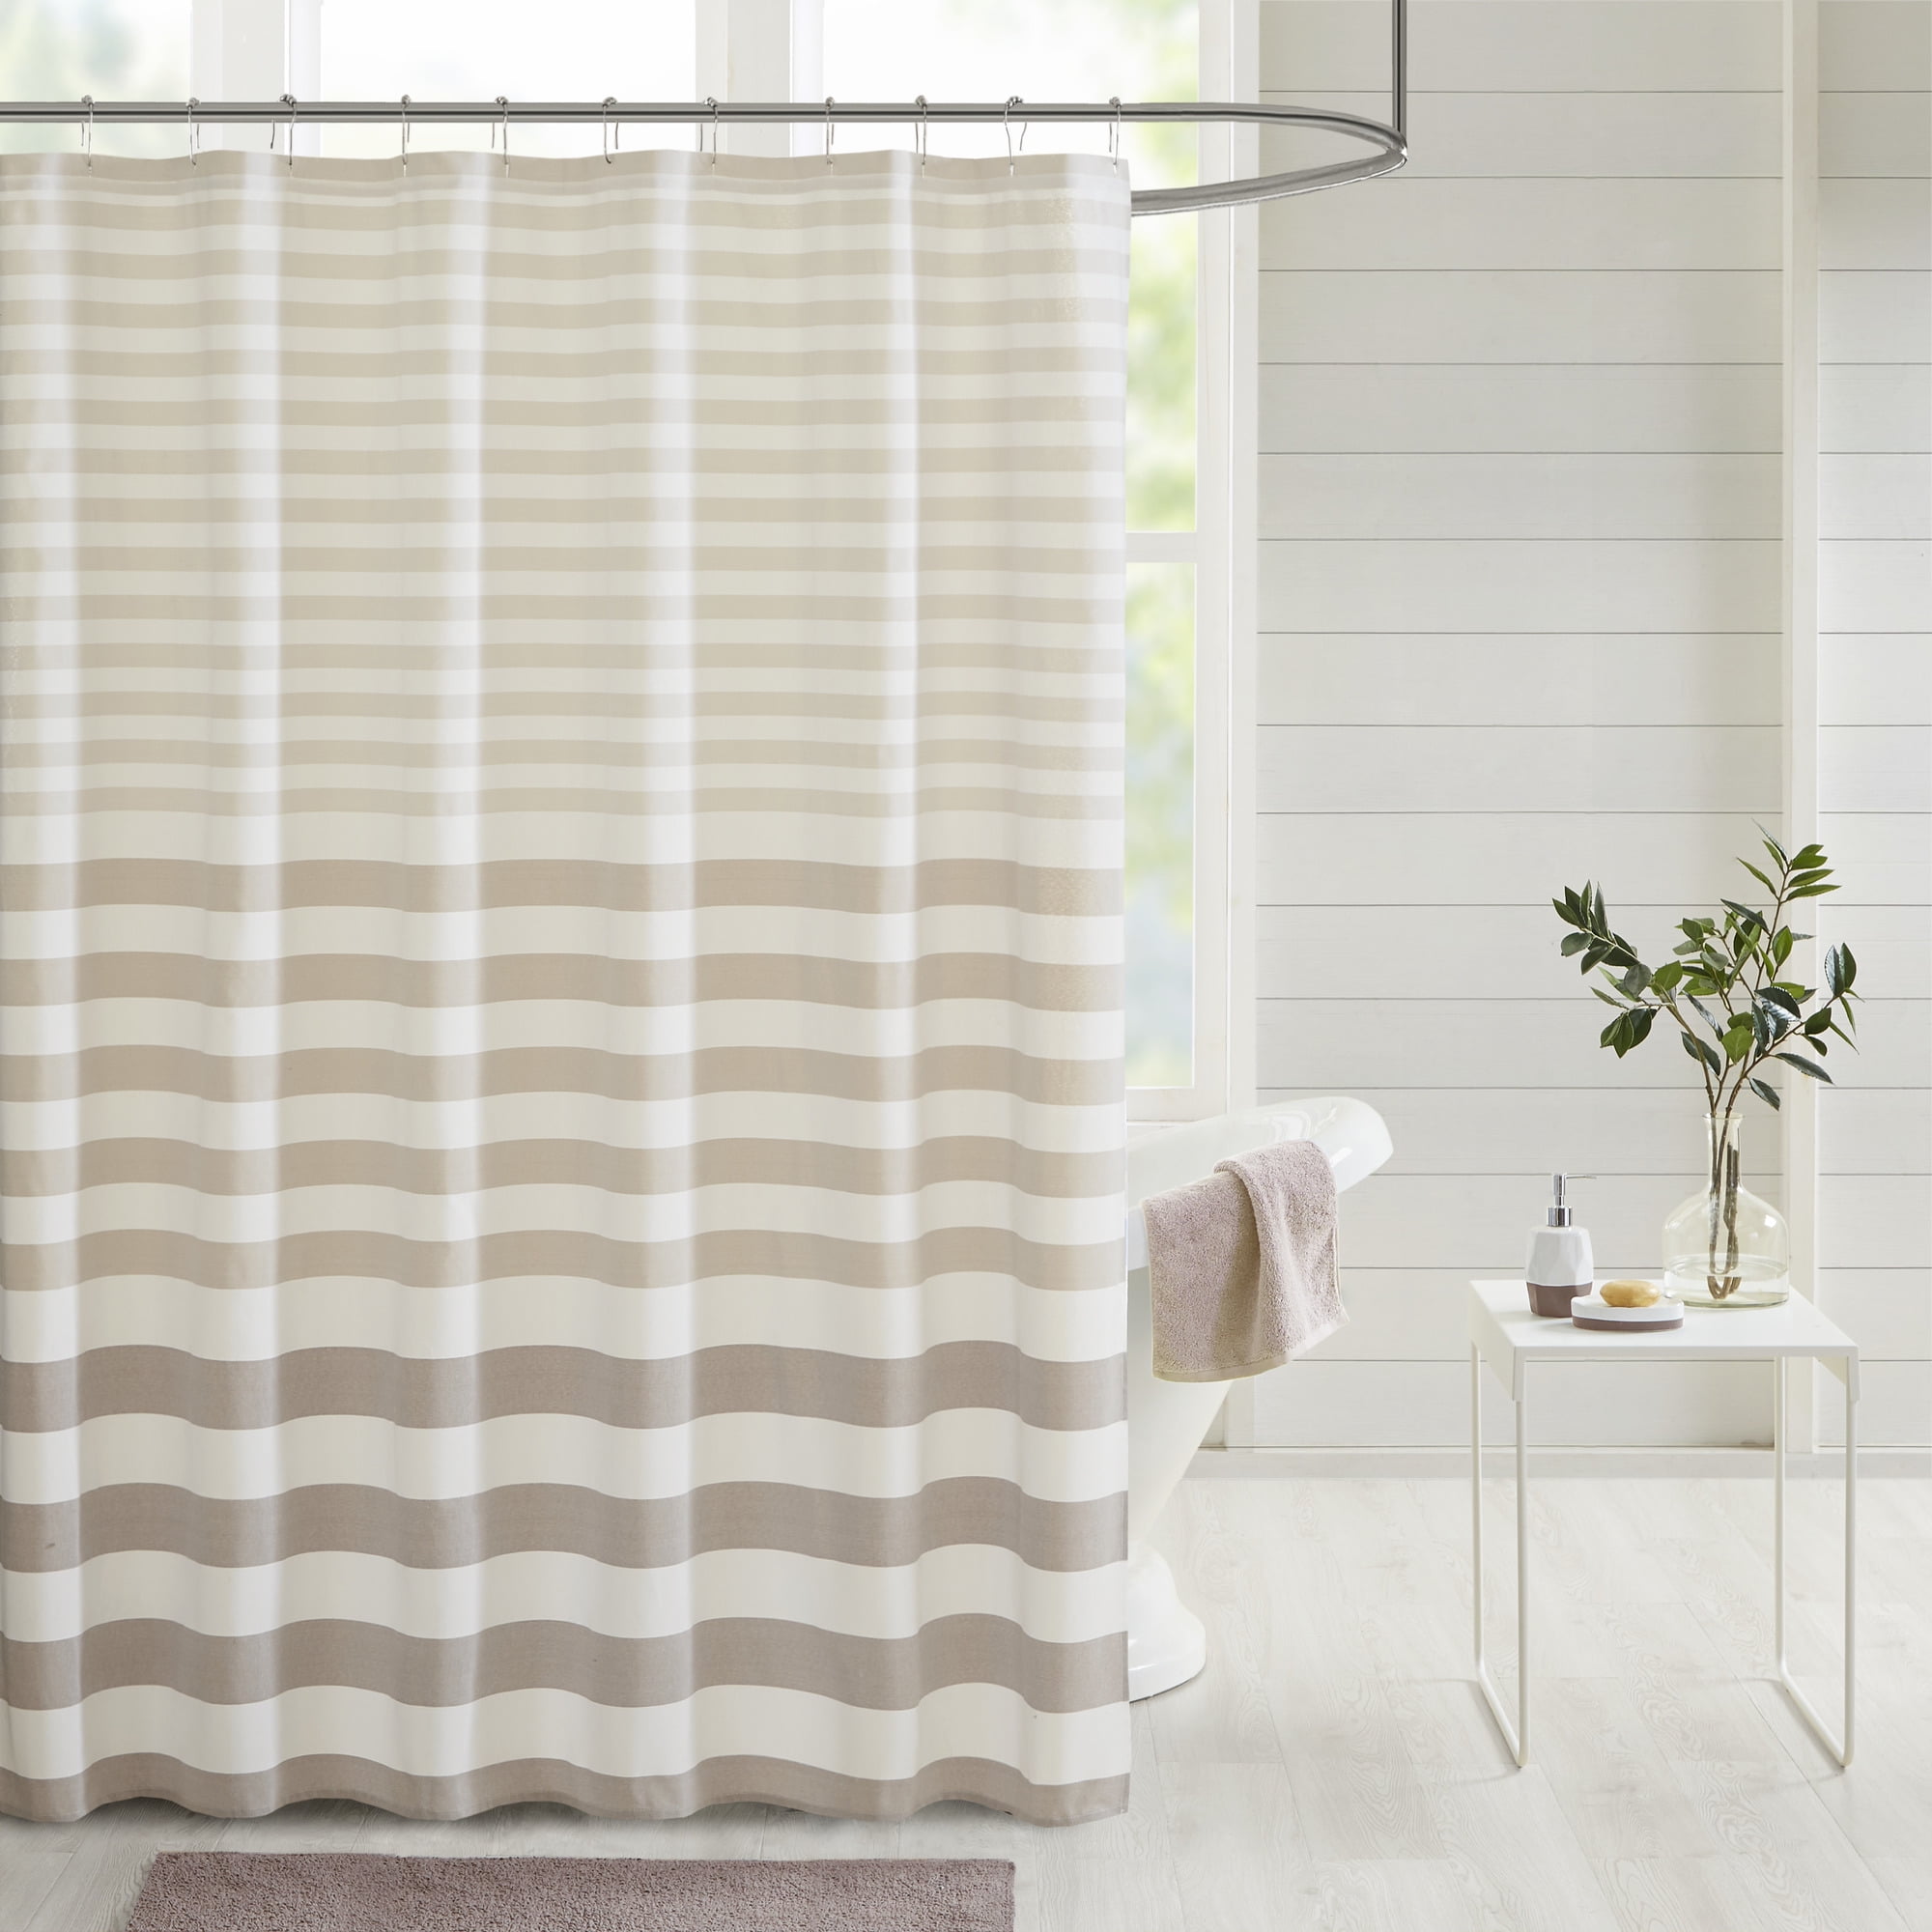 Home Essence Colette Stripe Blended, Dkny Highline 72 Inch X 96 Stripe Shower Curtain In Taupe